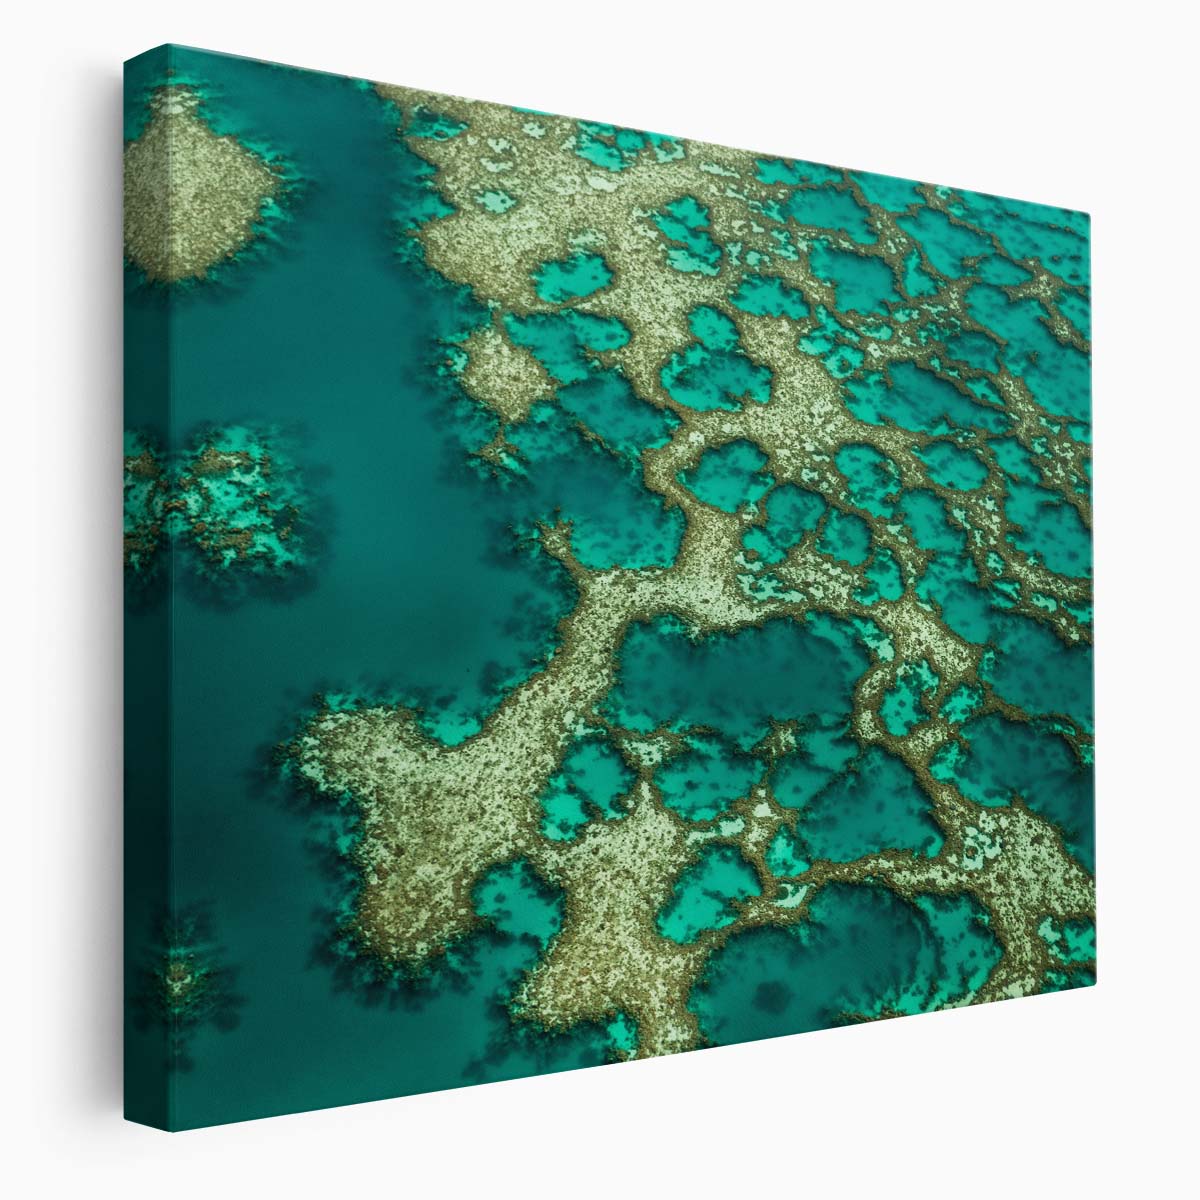 Turquoise Ocean & Lagoon Aerial Abstract Wall Art by Luxuriance Designs. Made in USA.